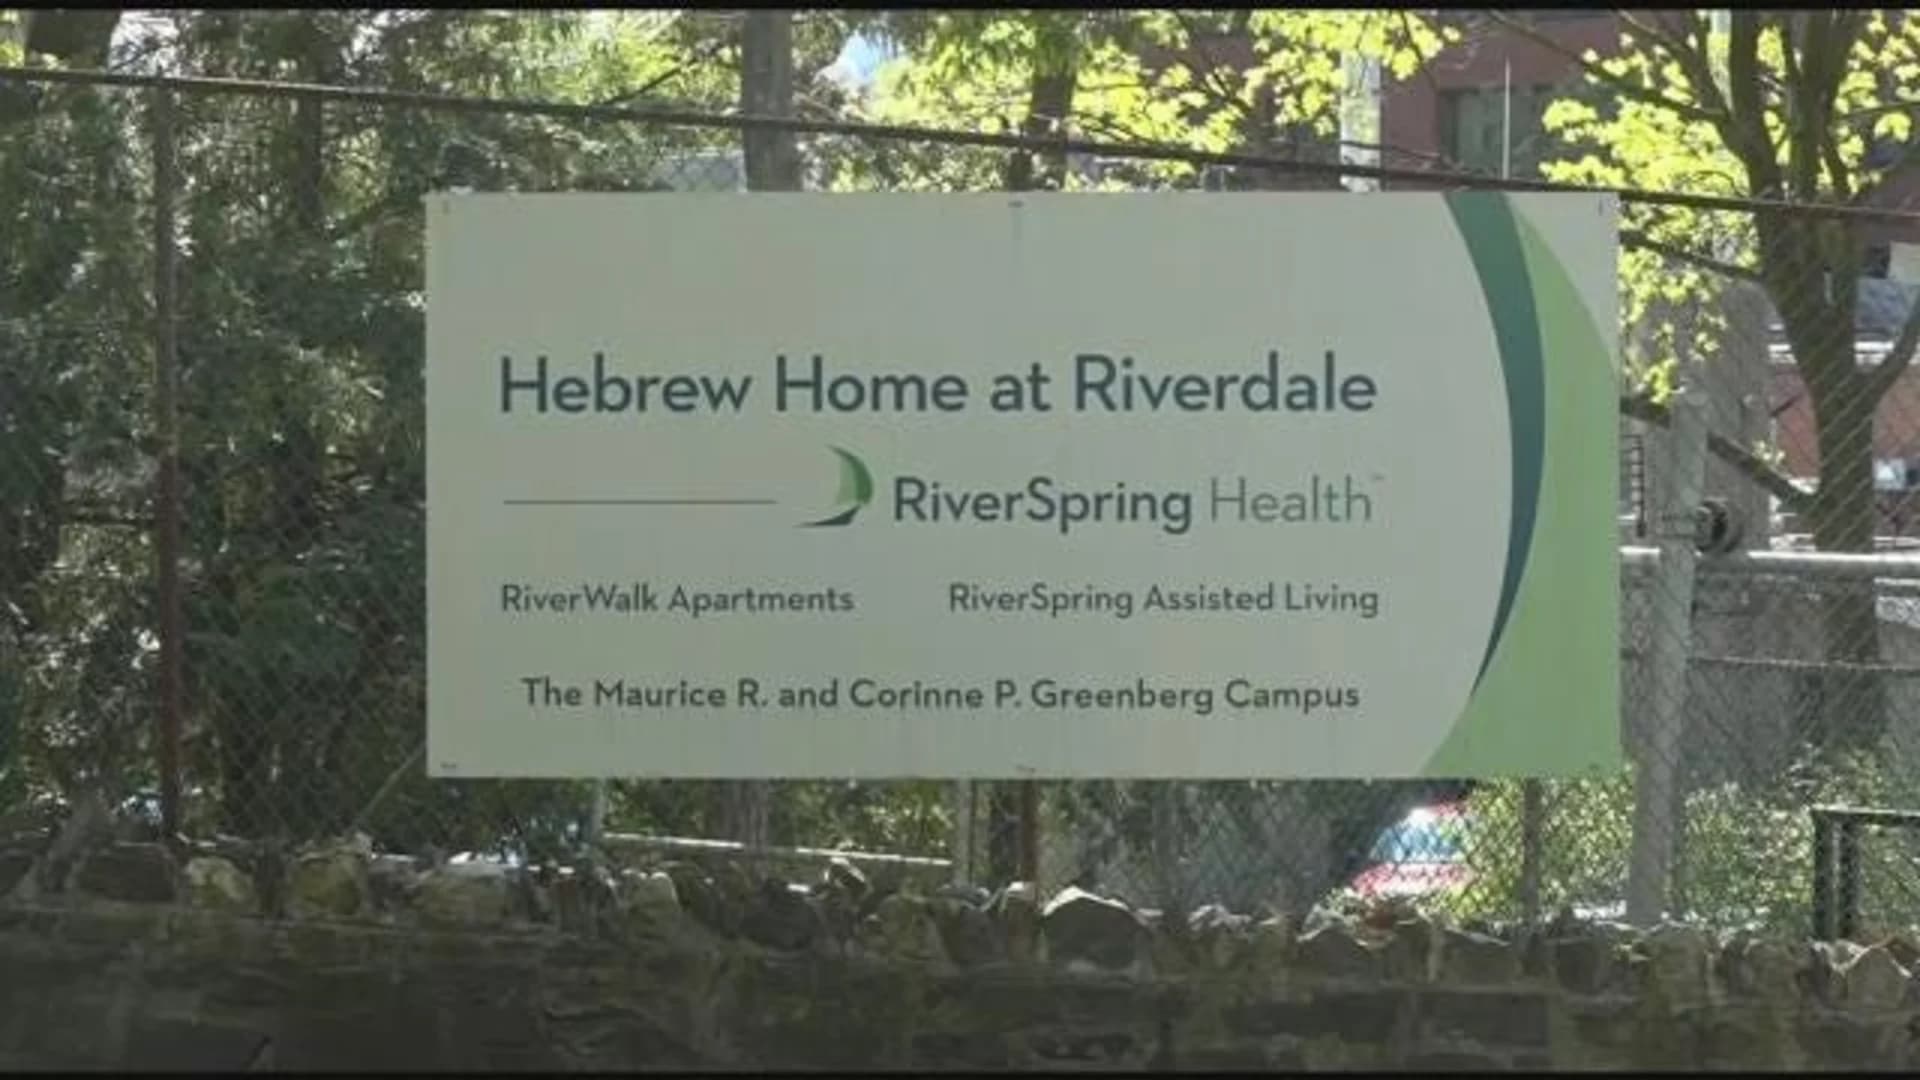 State Dept. of Health conducts COVID-19 survey Hebrew Home at Riverdale